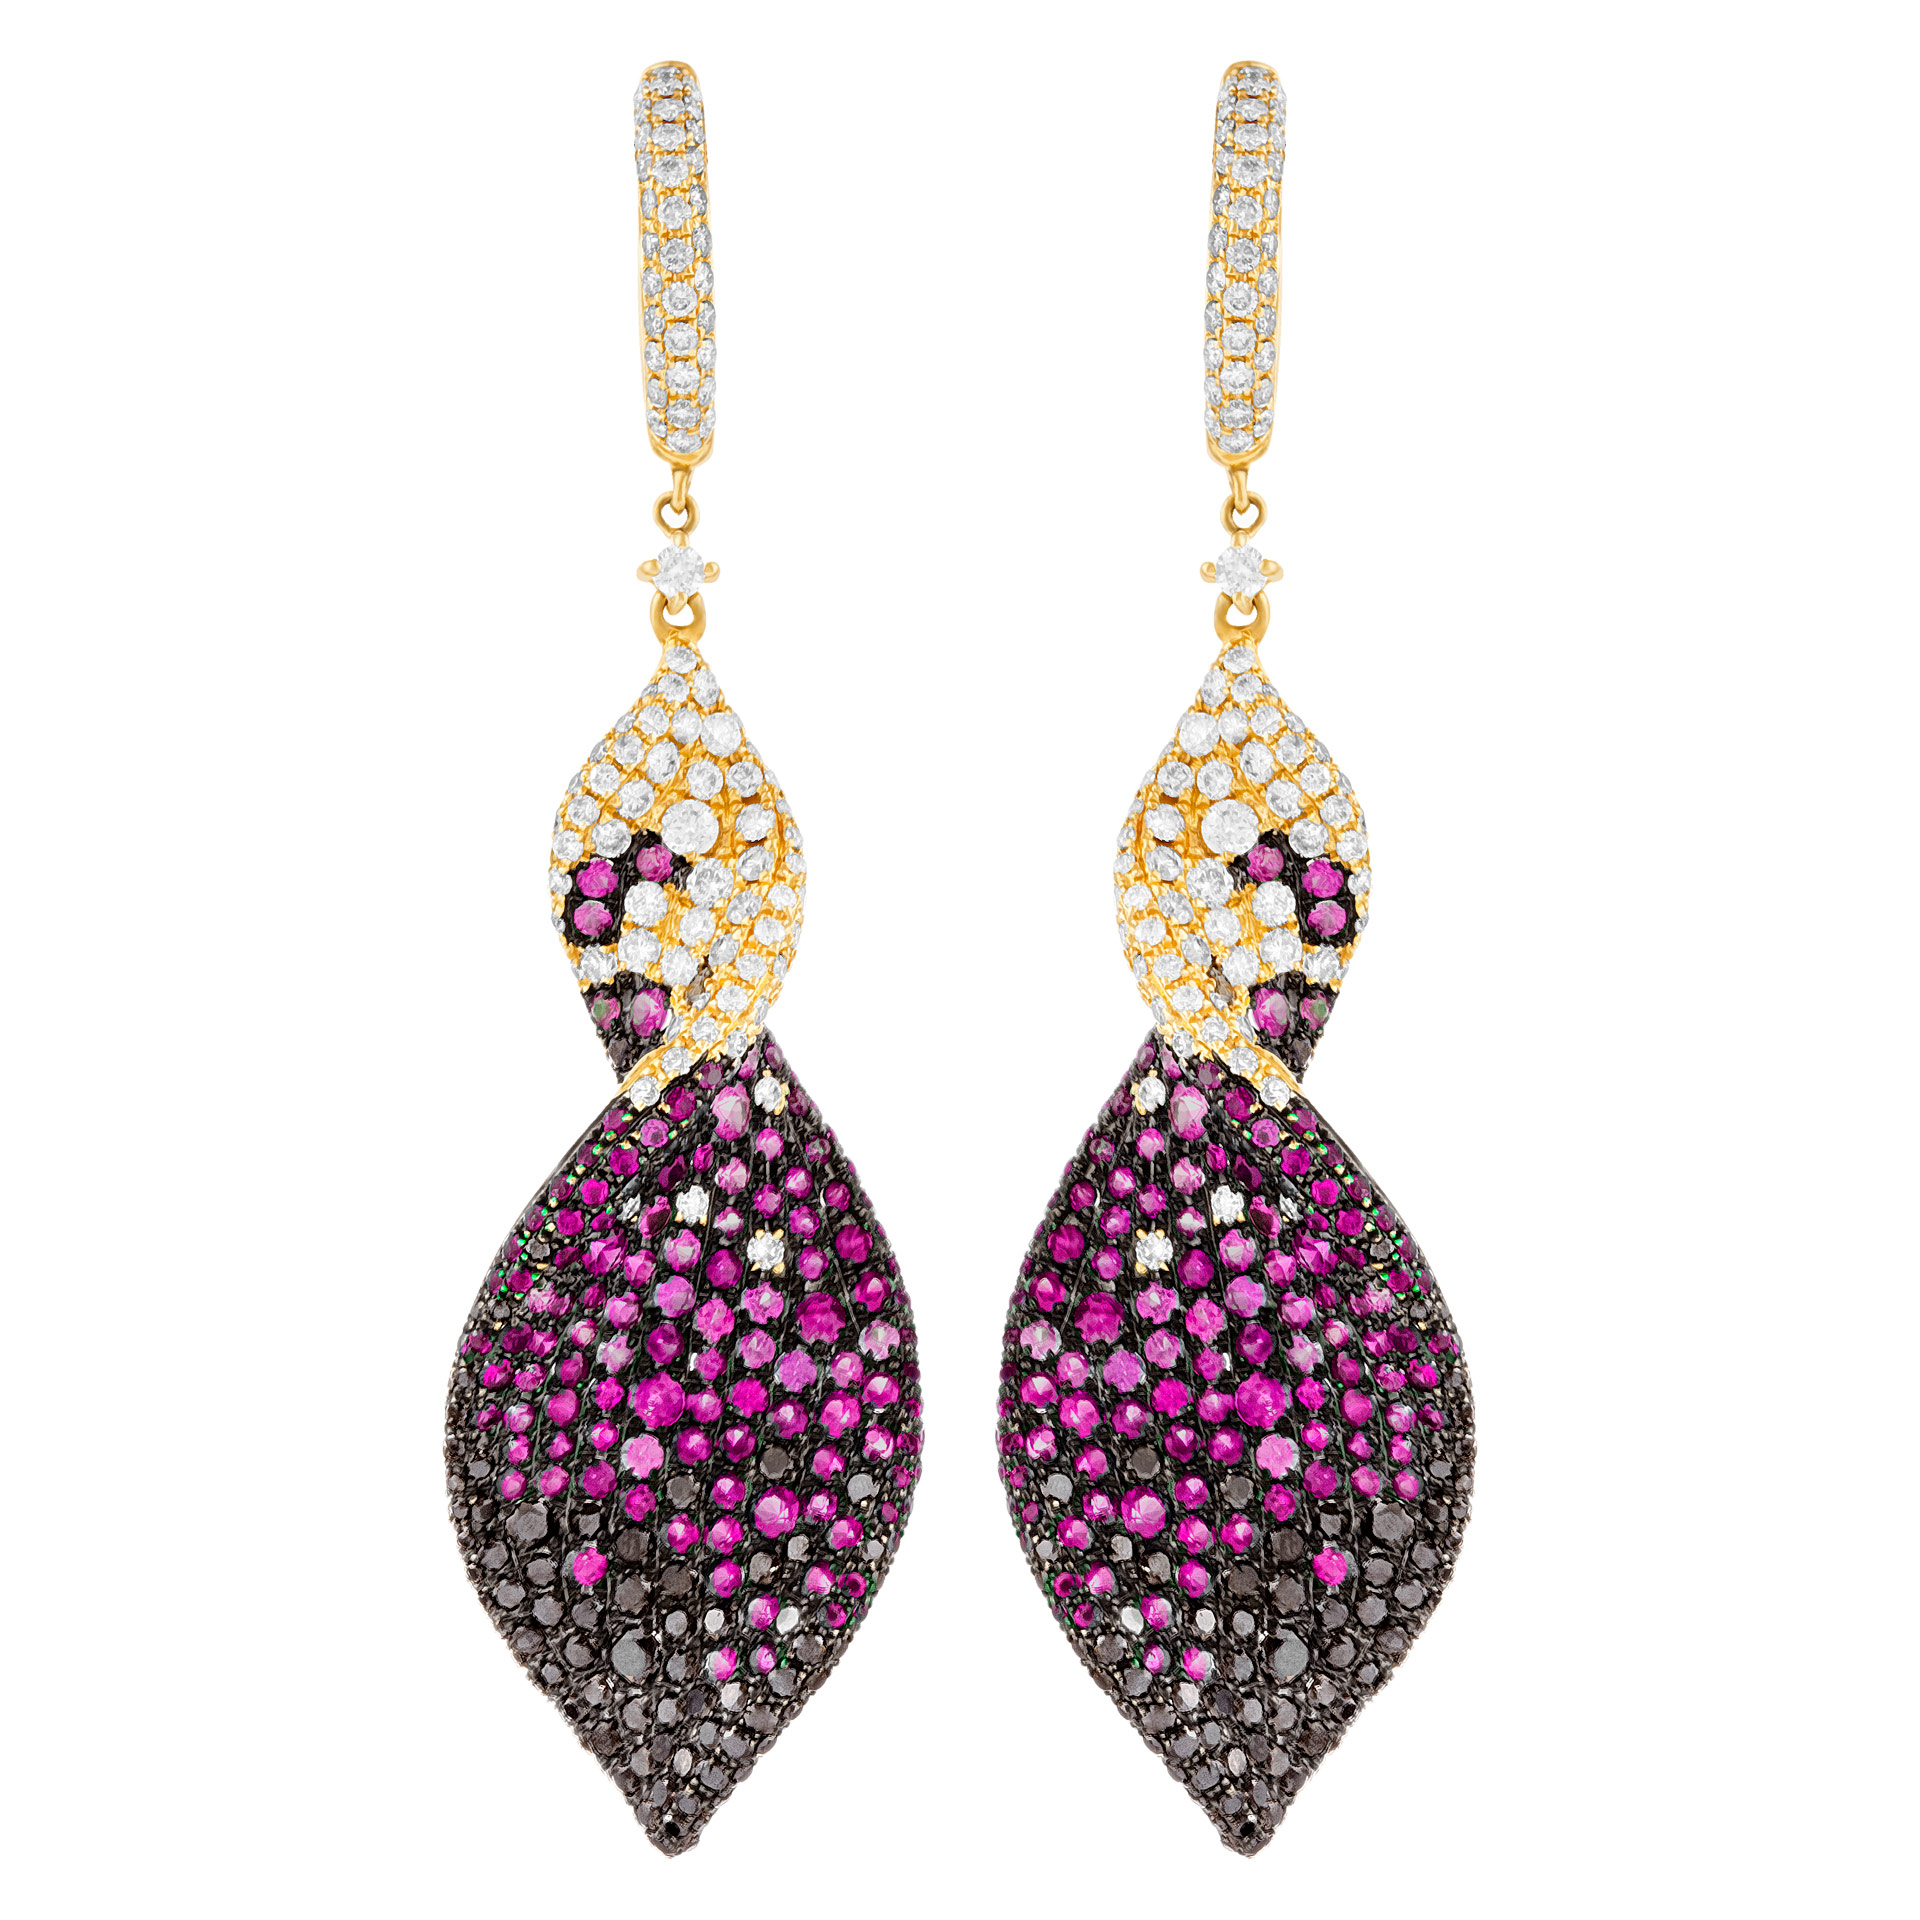 Twisted ruby, sapphire & diamond earrings in 18k with PVD